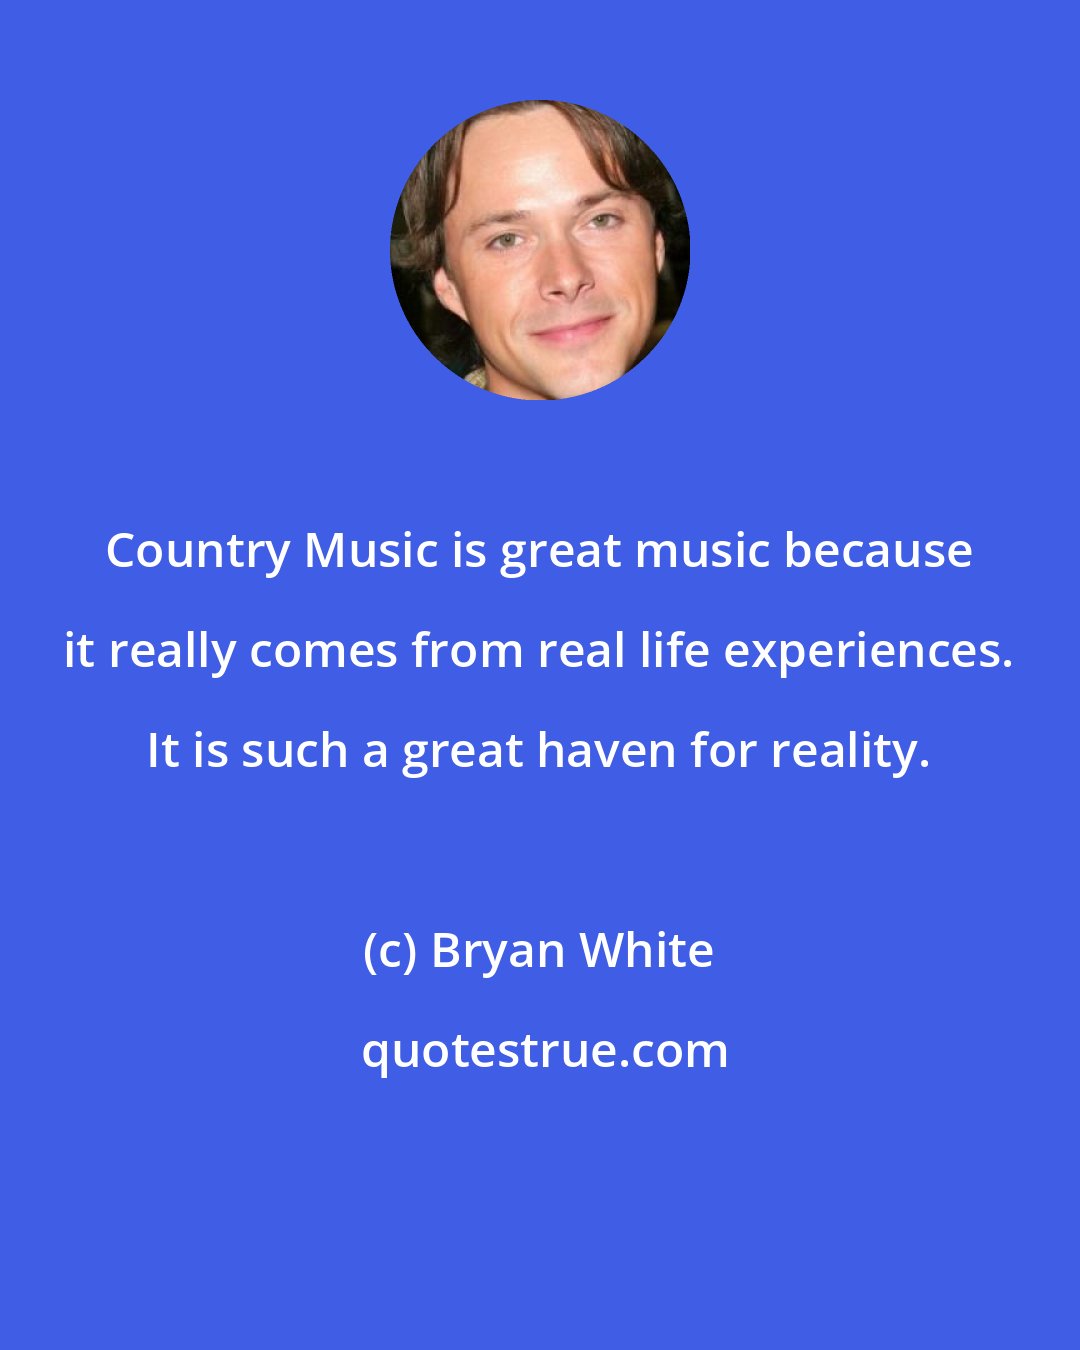 Bryan White: Country Music is great music because it really comes from real life experiences. It is such a great haven for reality.